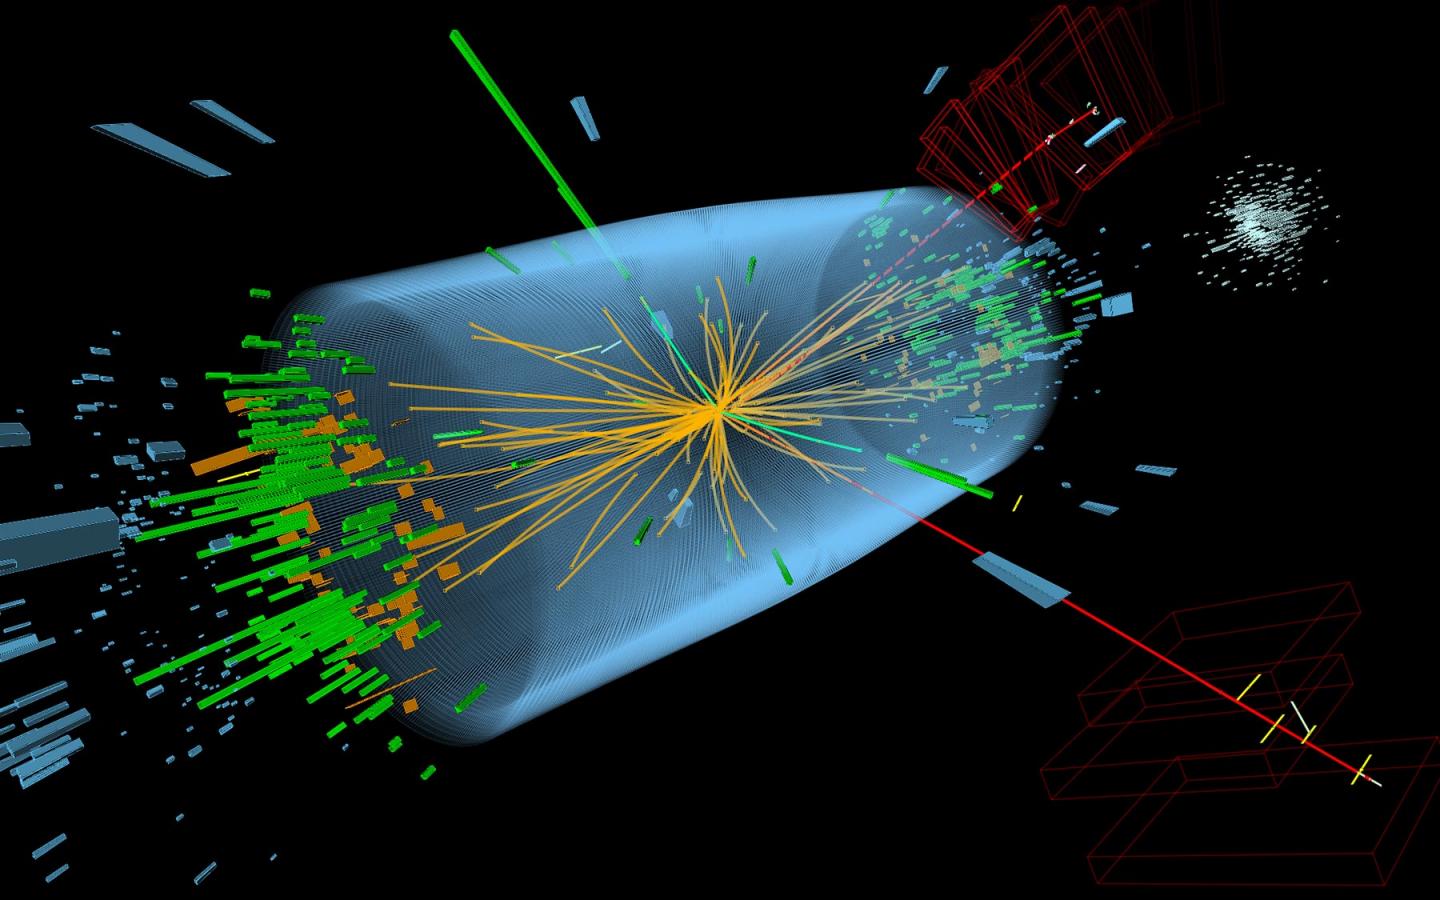 A 3D Perspective of a Higgs Boson Event Recorded in 2012